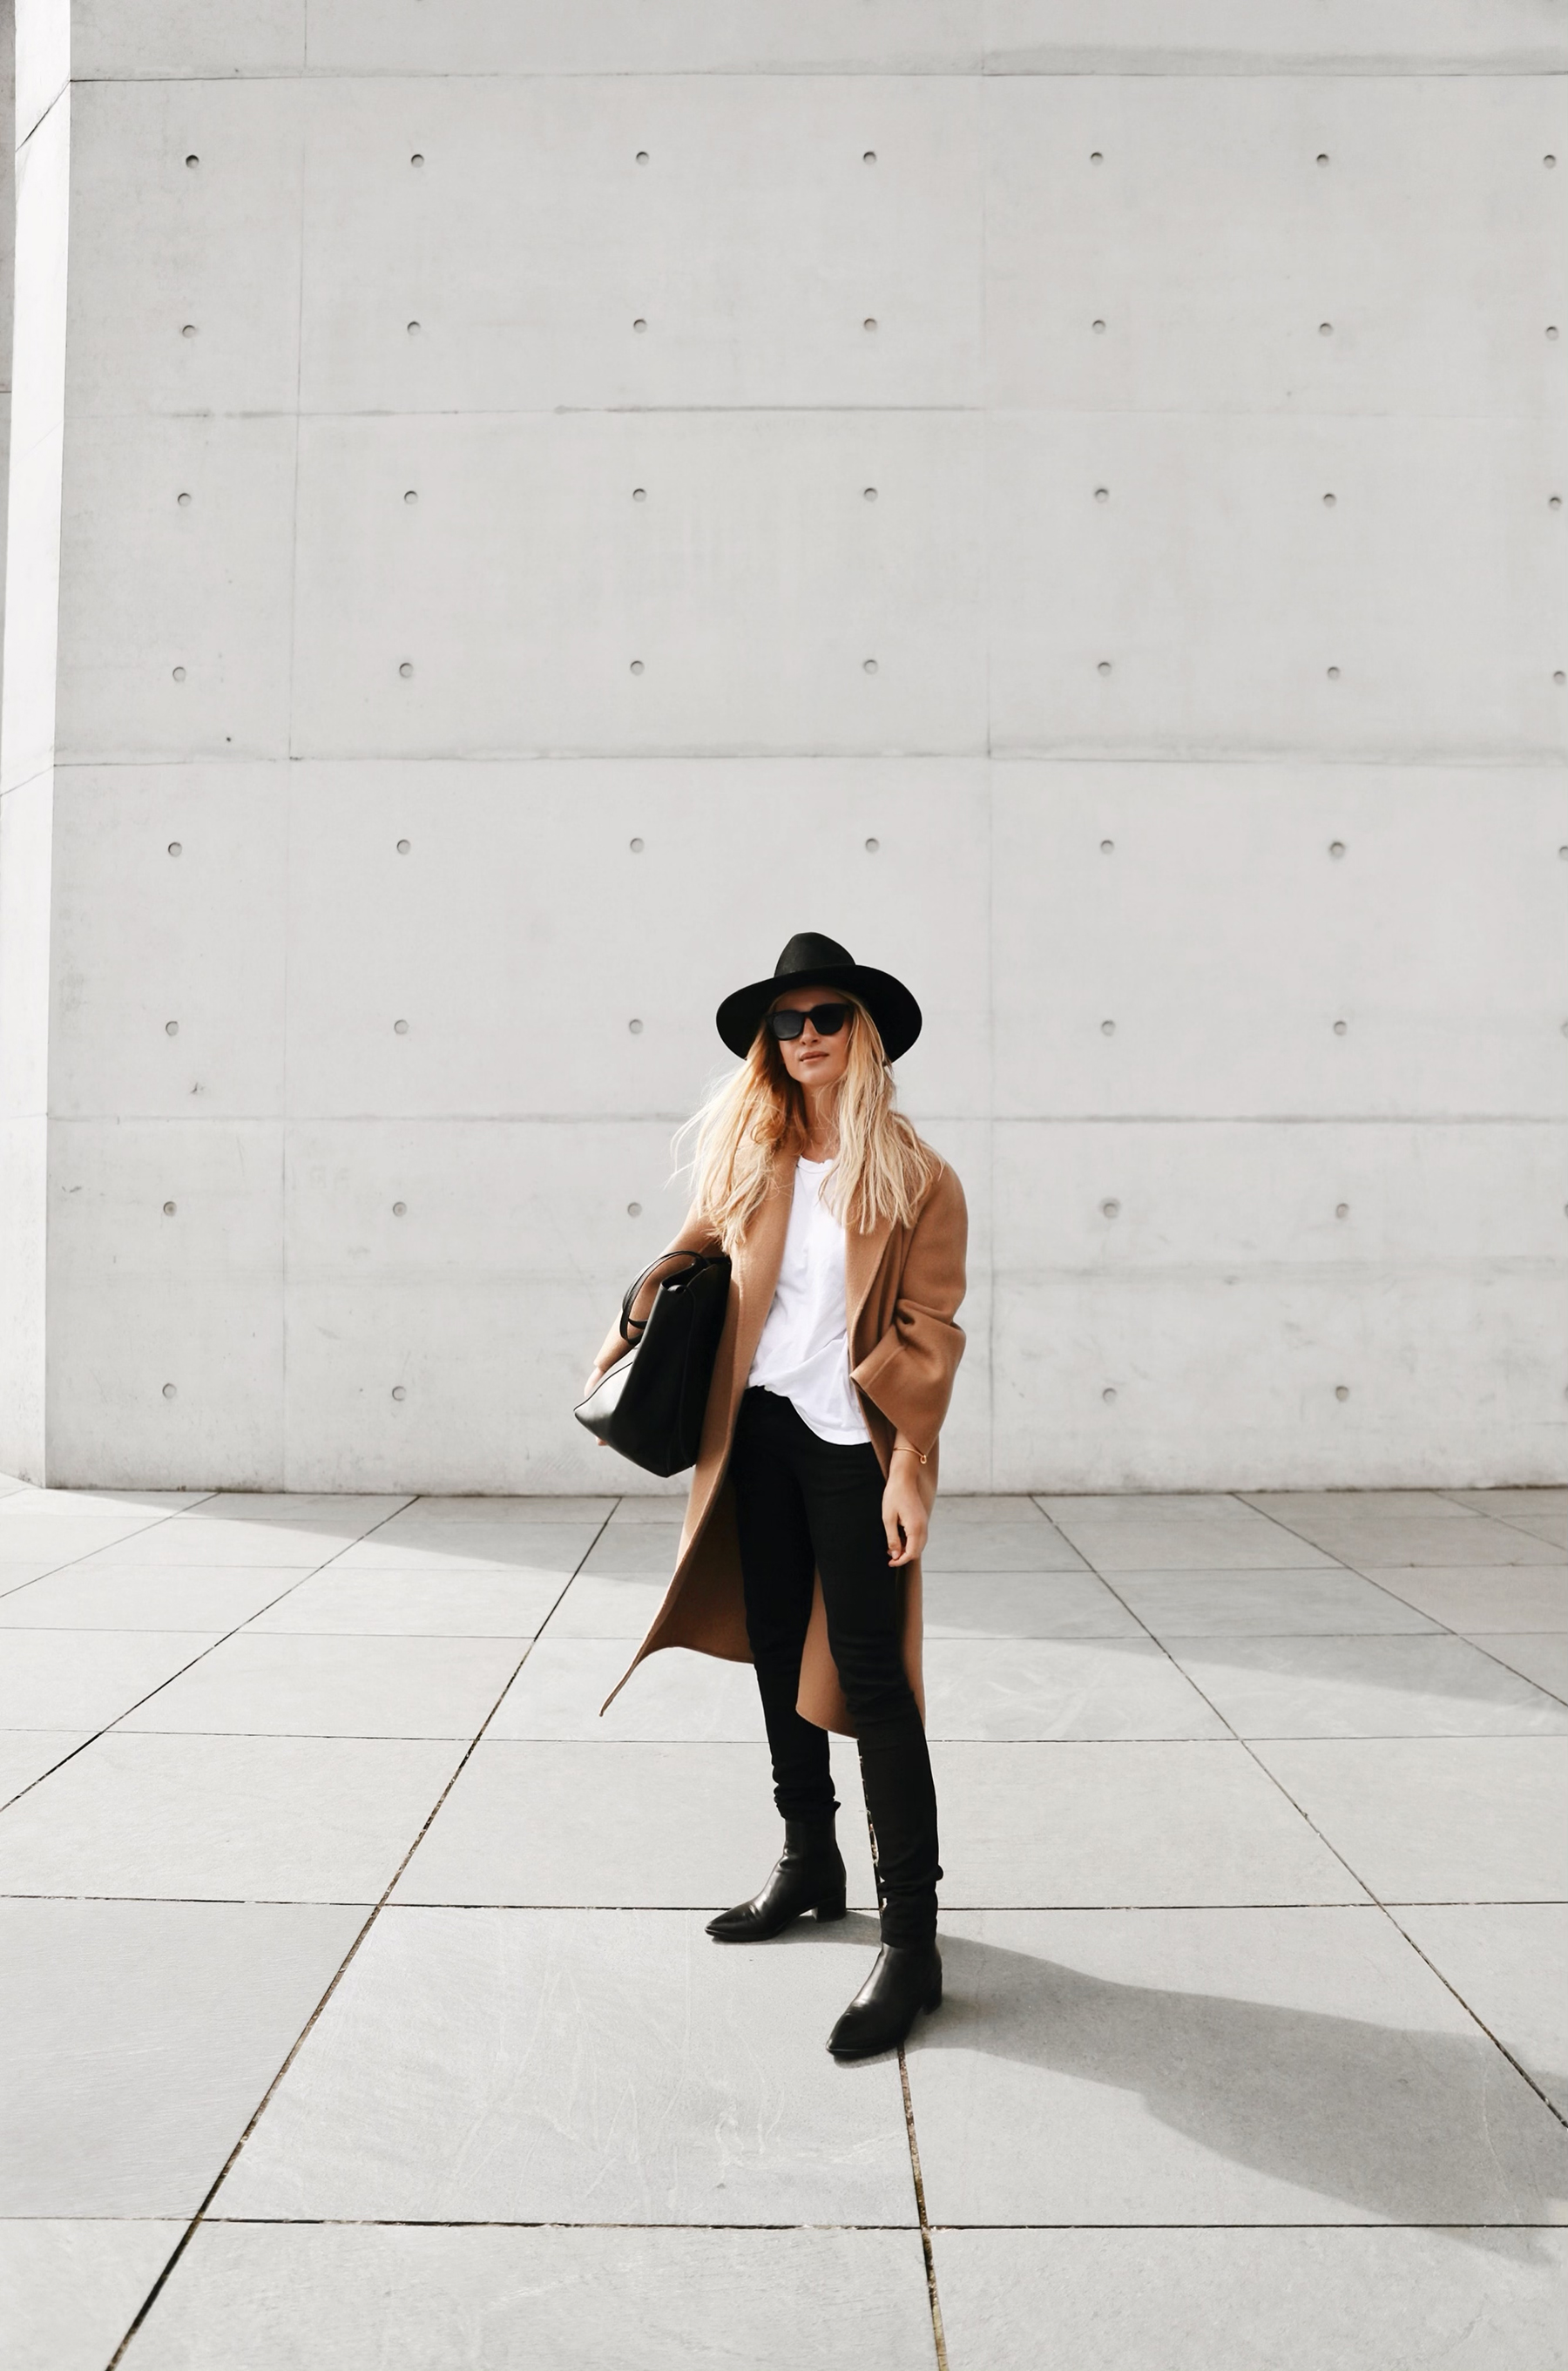 5 Outfits Inspiring Me Lately